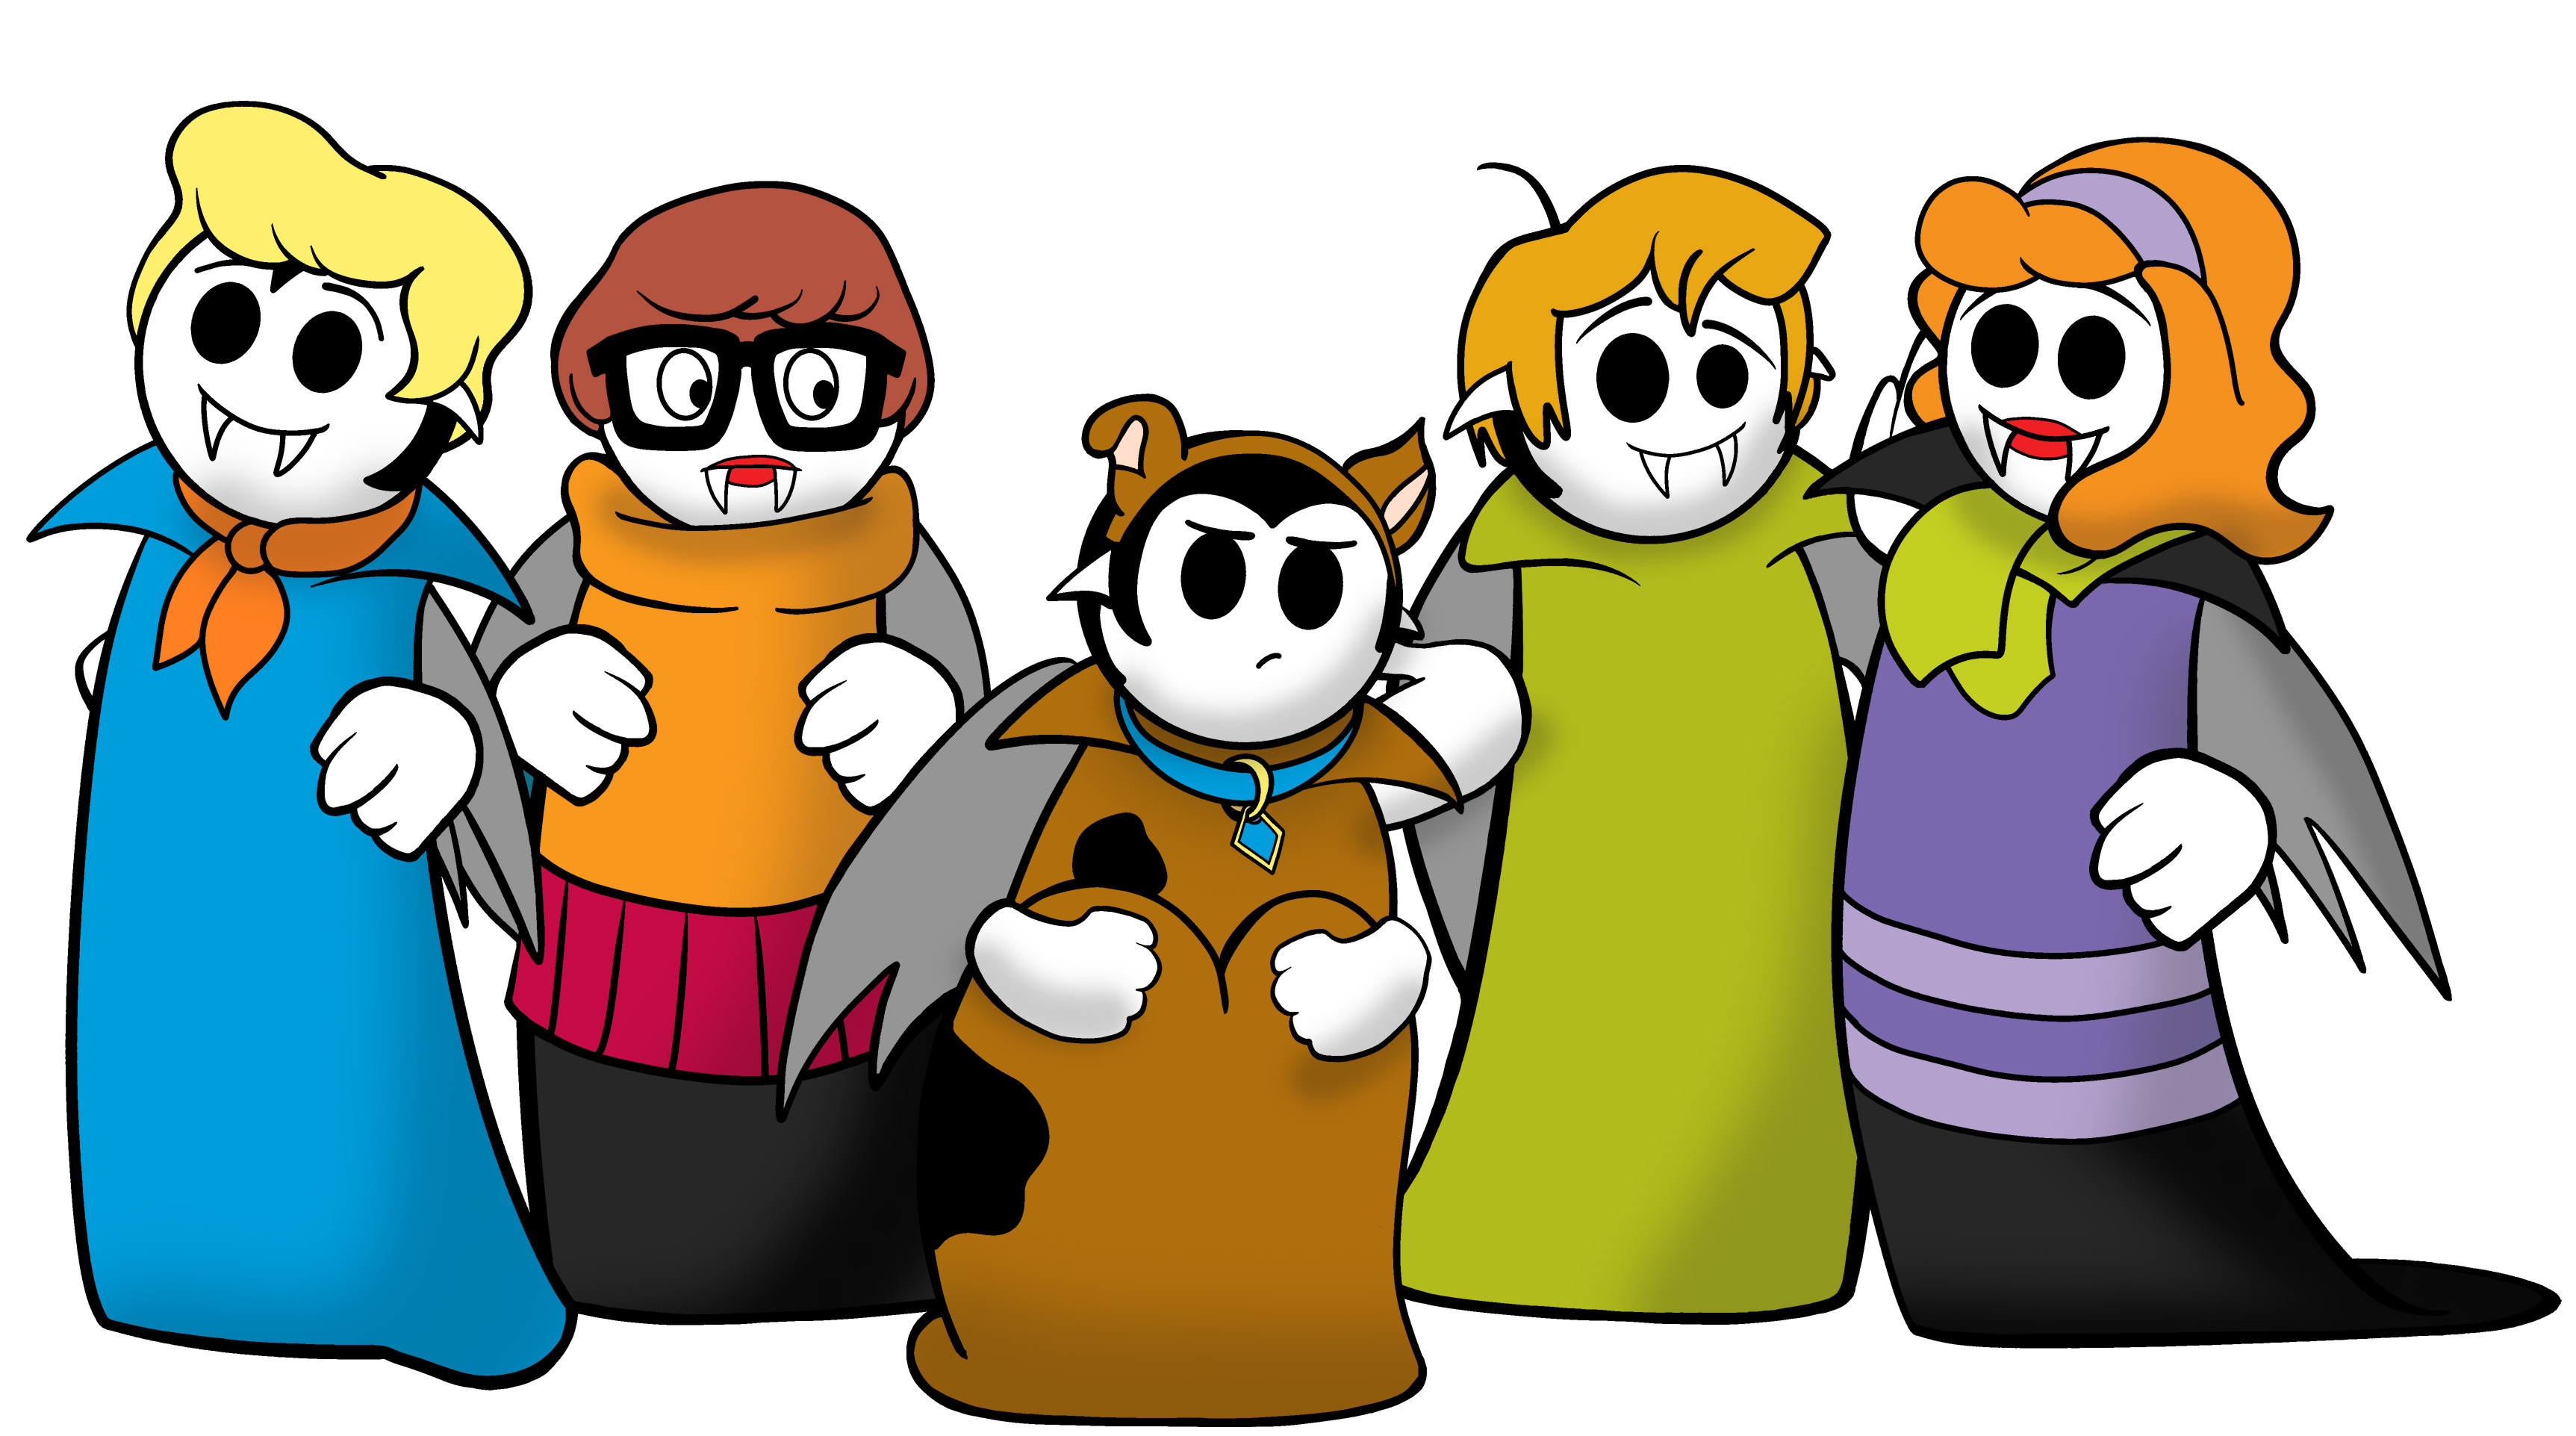 Illustration of several Little Vampires cosplaying as the Scooby Doo gang